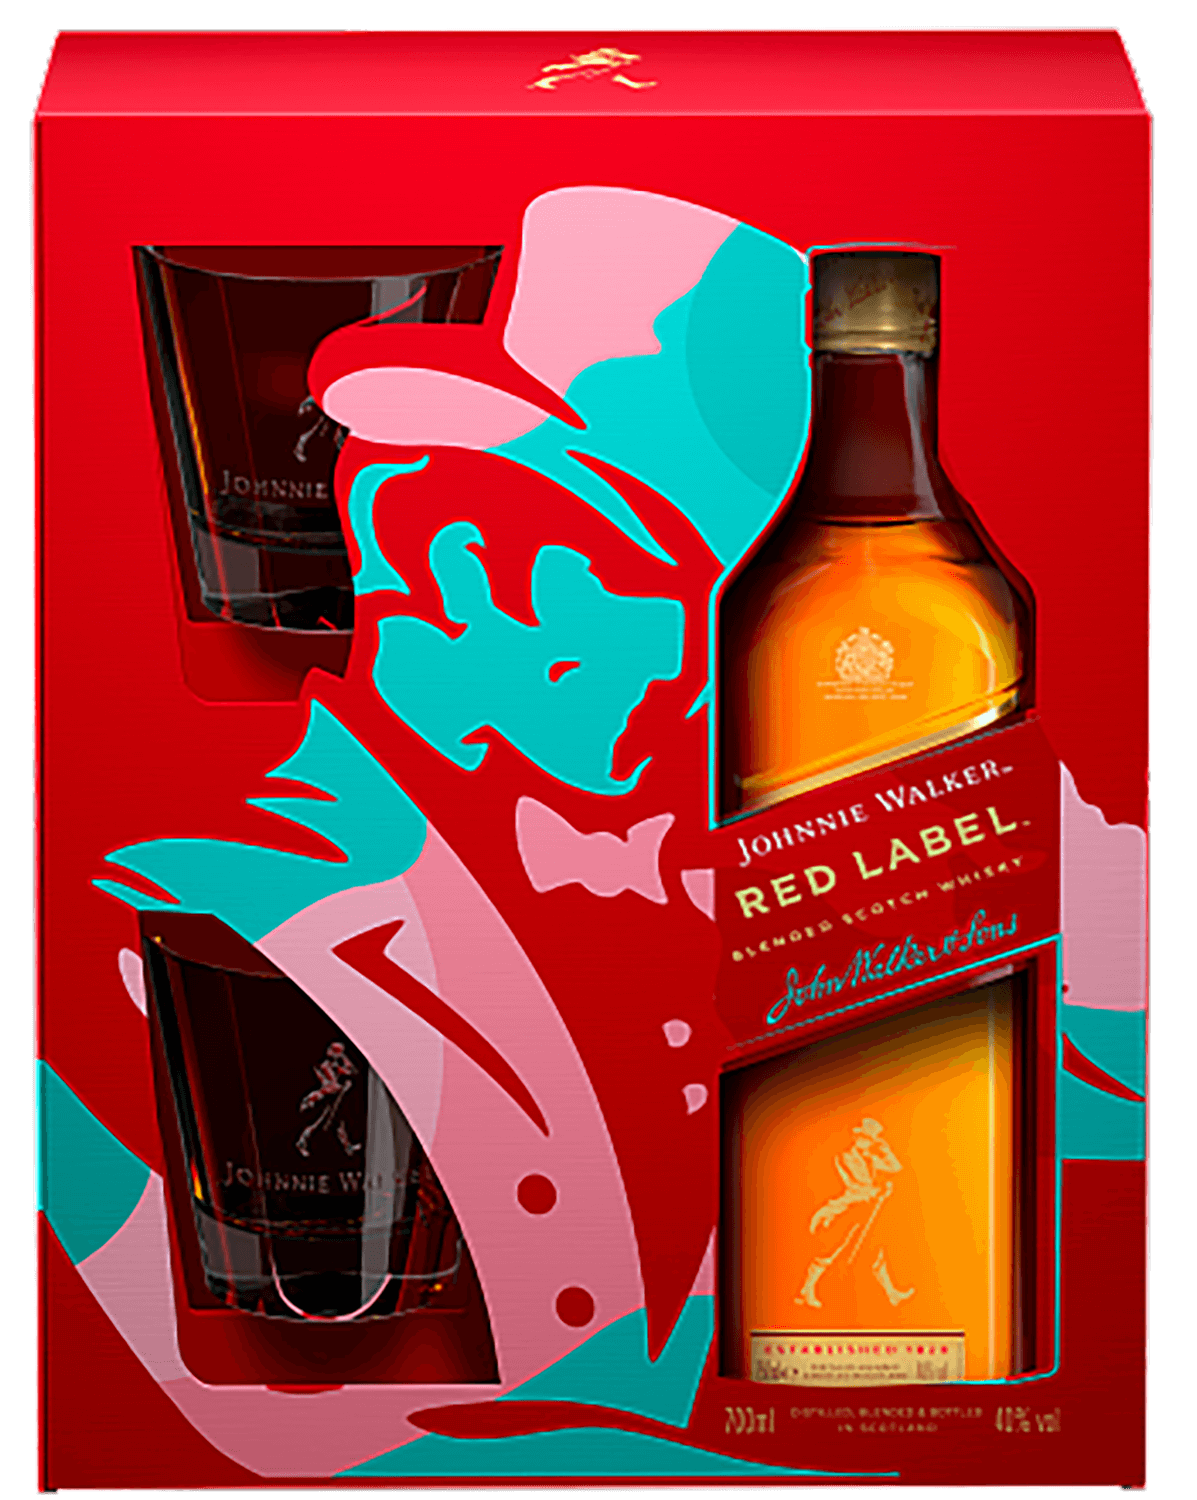 Johnnie Walker Red Label Blended Scotch Whisky (gift box with 2 glasses) johnnie walker green label blended malt scotch whisky gift box